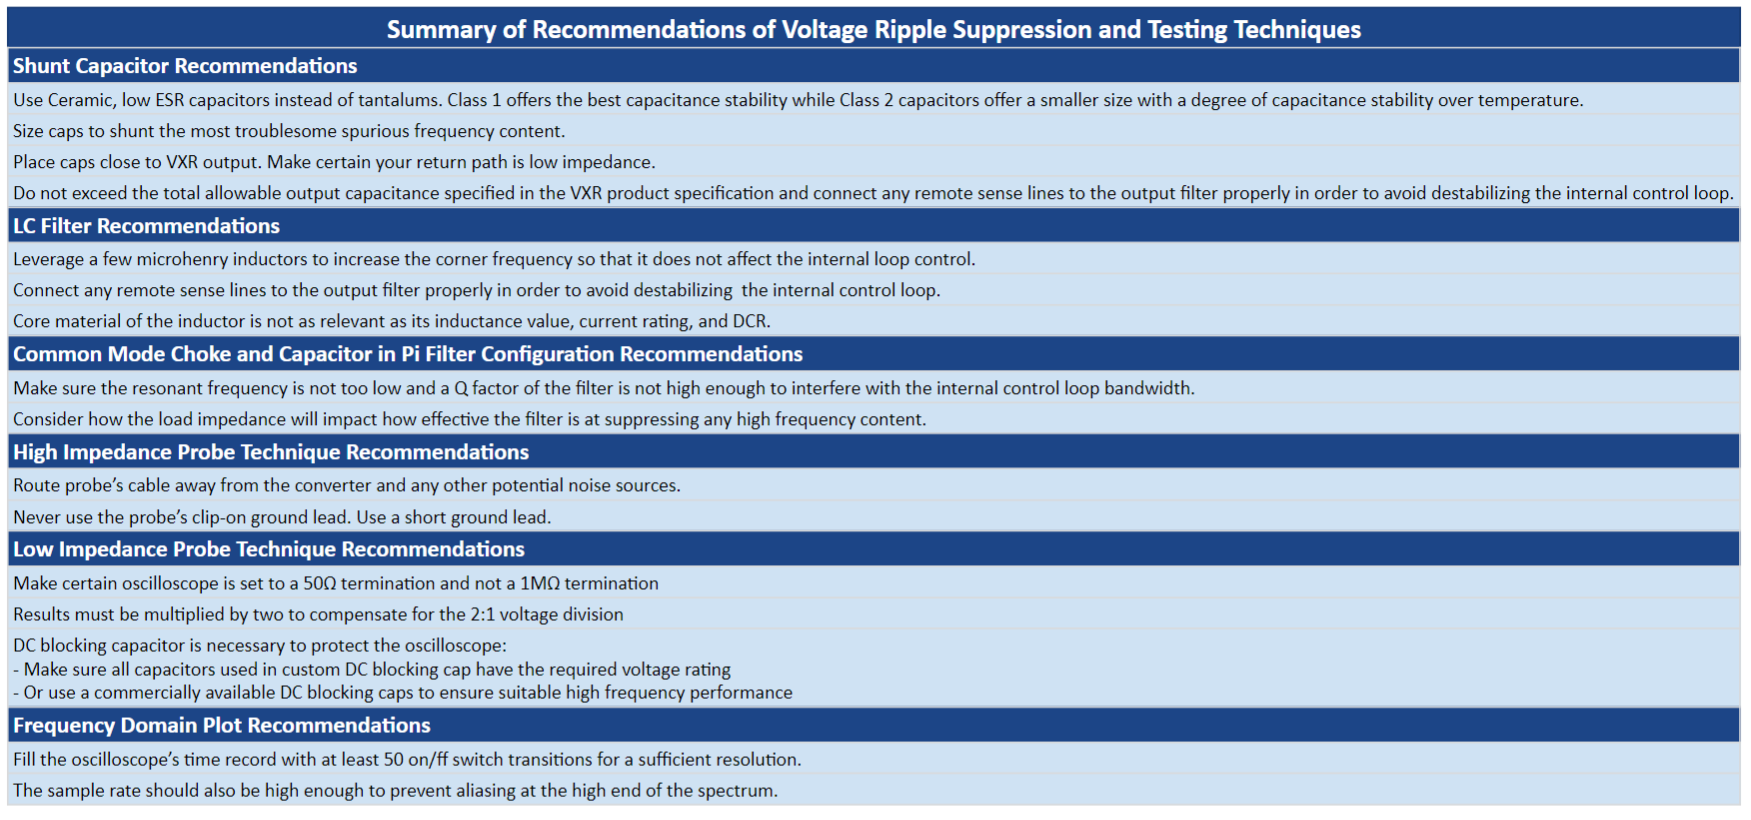 Figure 8: Summary of recommendations of voltage ripple suppression and testing techniques. Source: VPT, Inc.